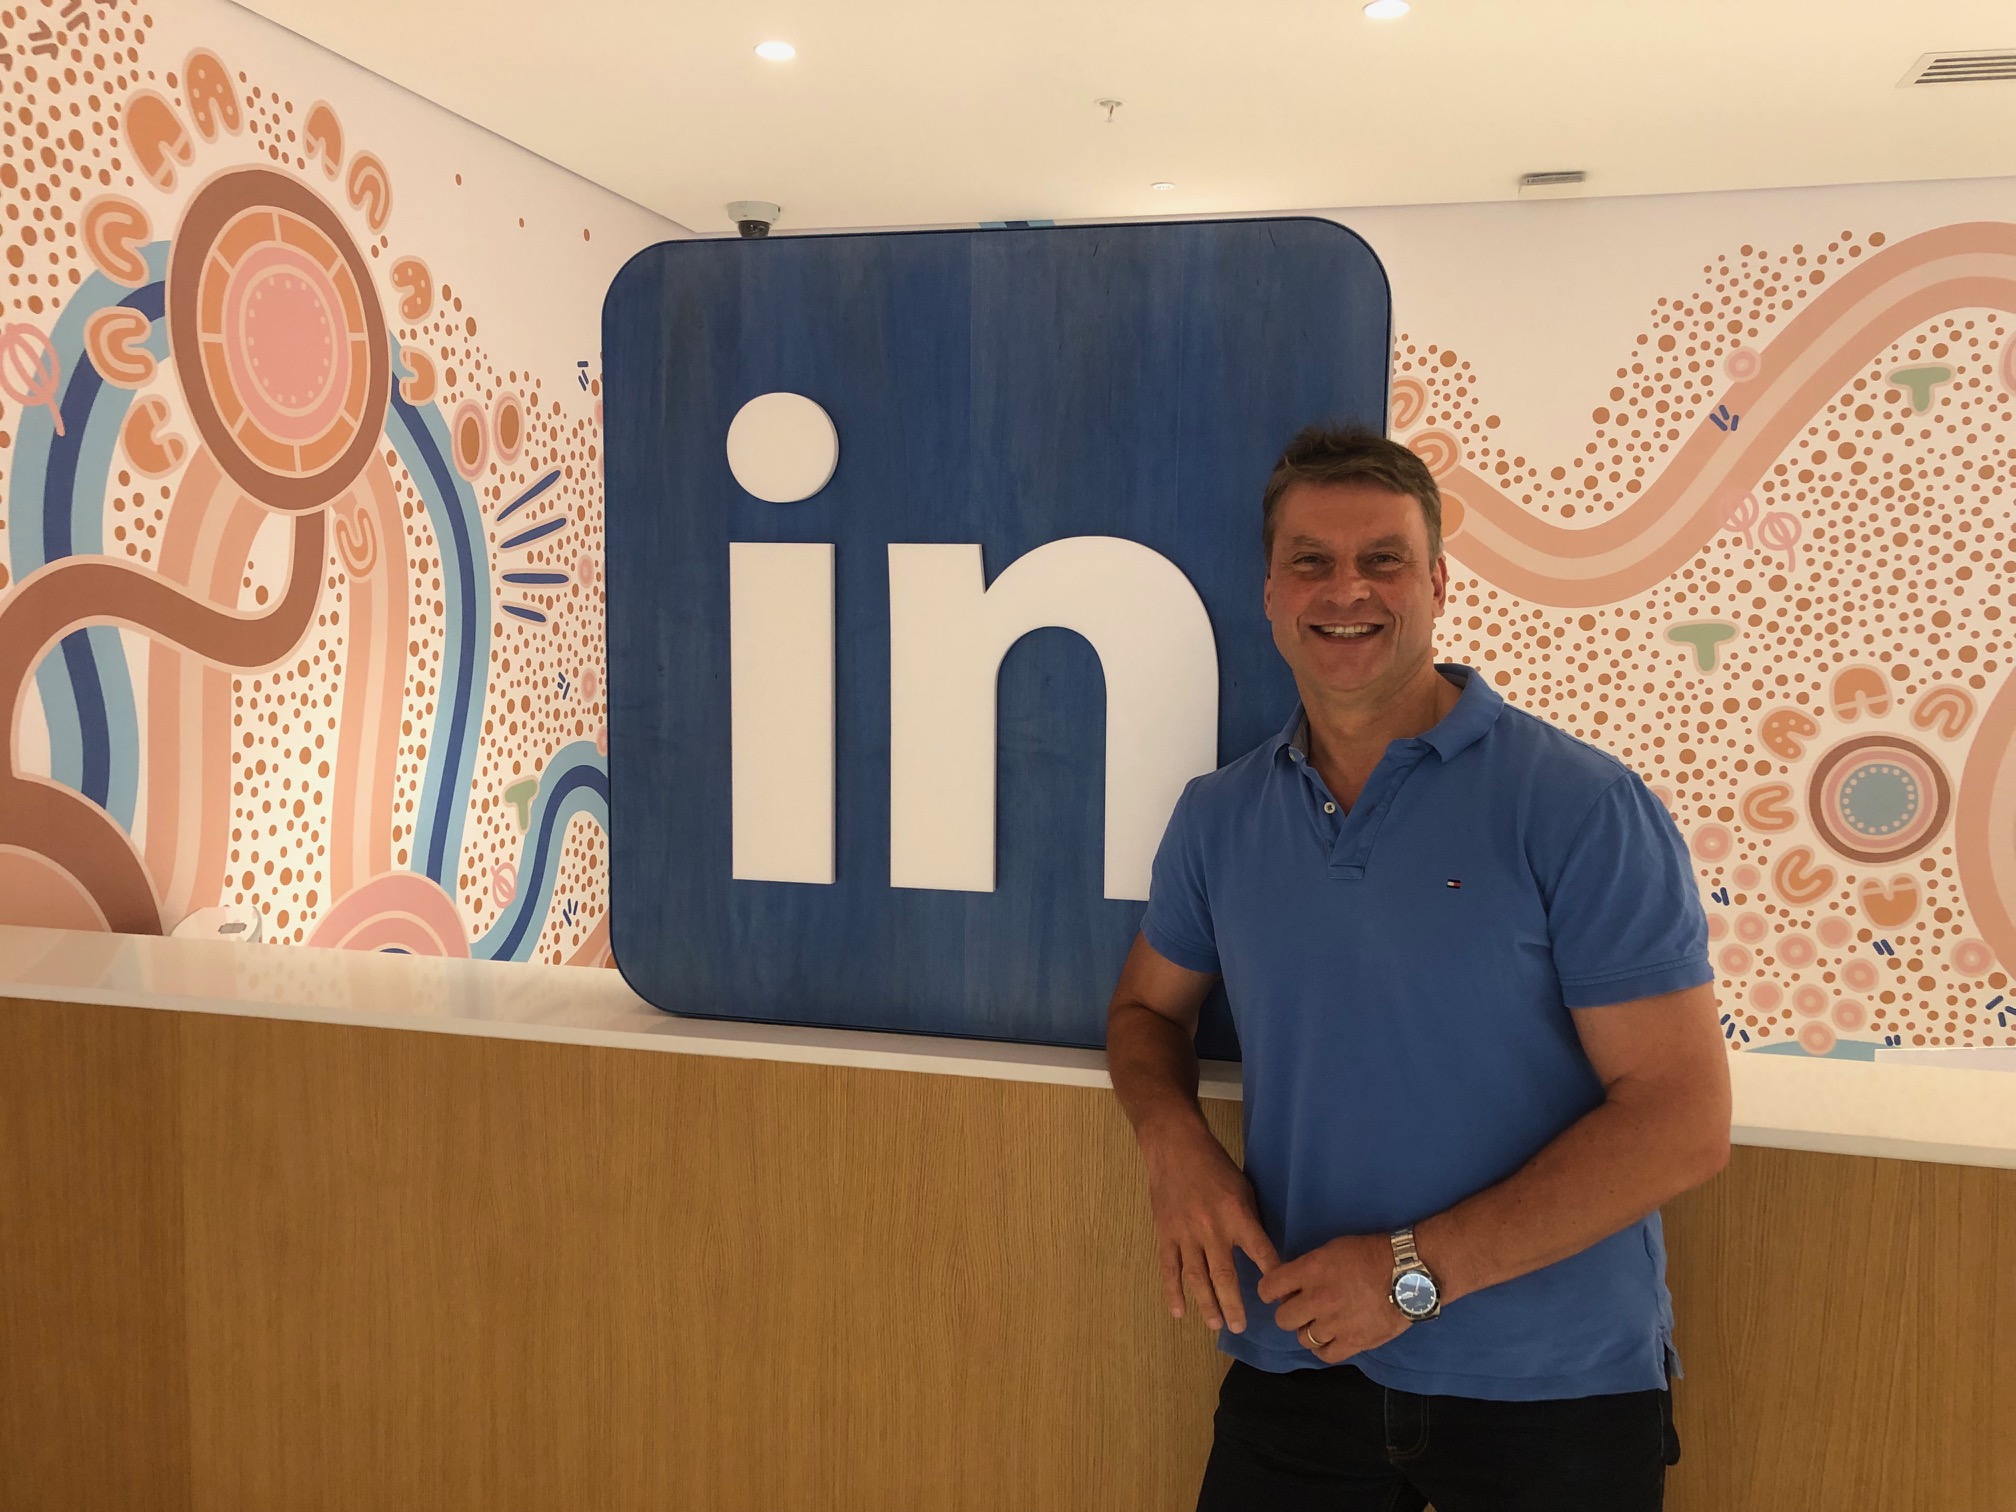 See Peter's 120 (!) LinkedIn Recommendations thumbnail